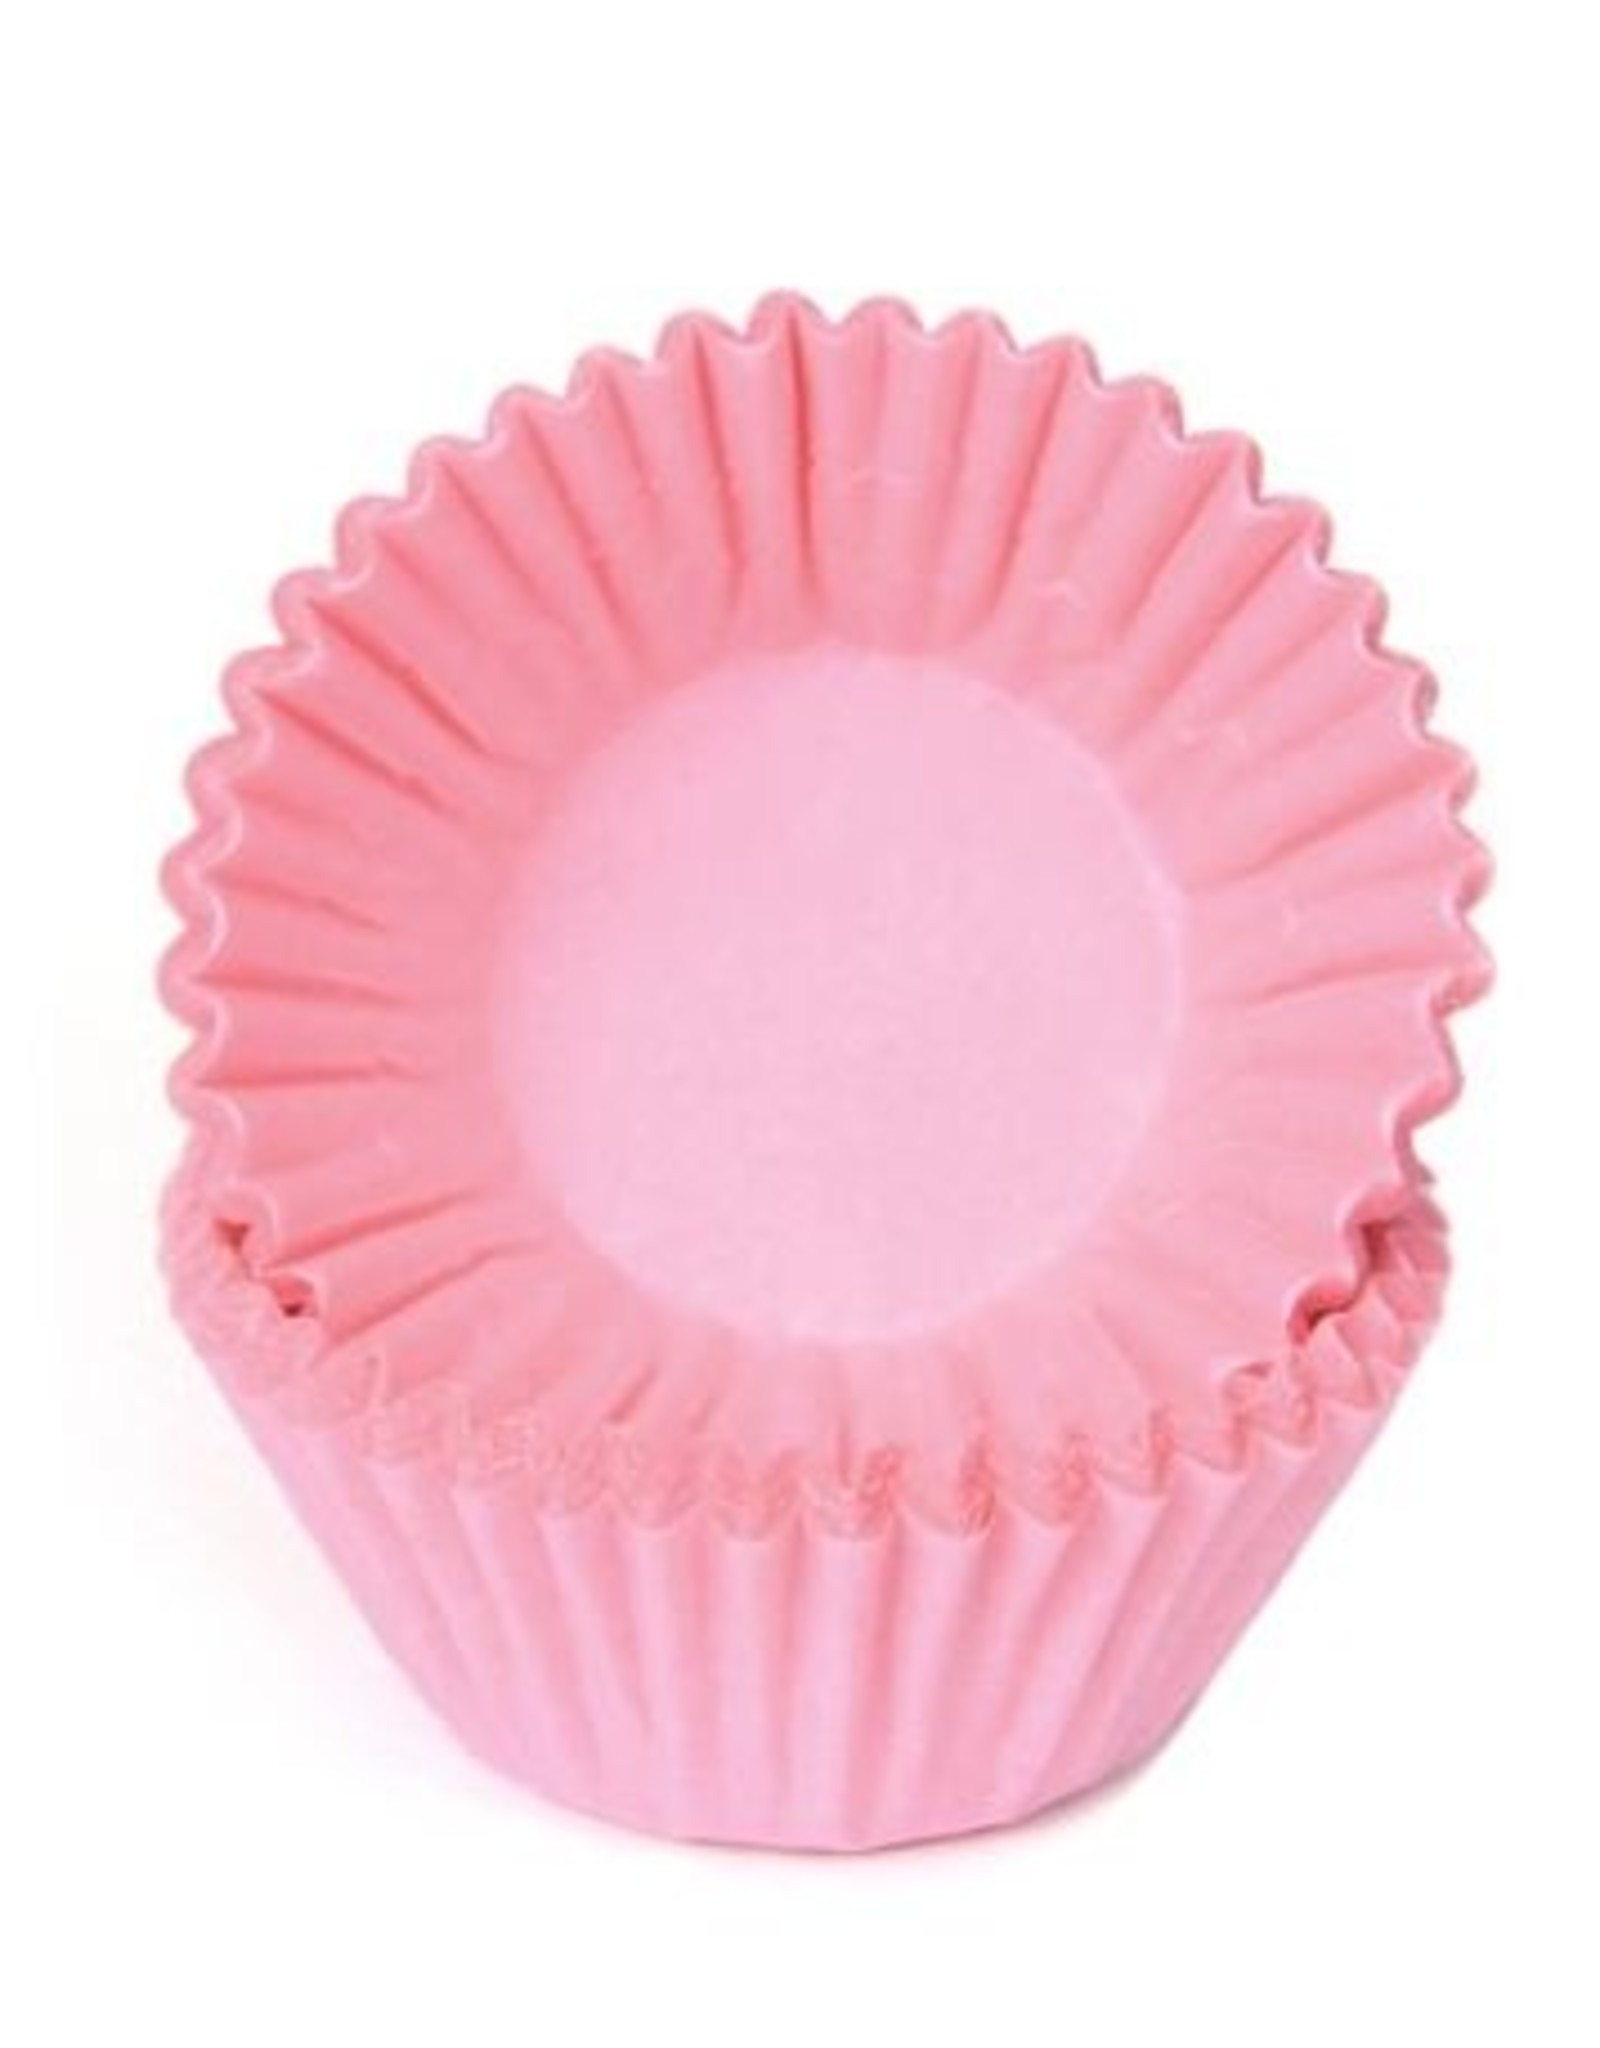 House of Marie House of Marie Chocolade Baking Cups Pastel Roze pk/100